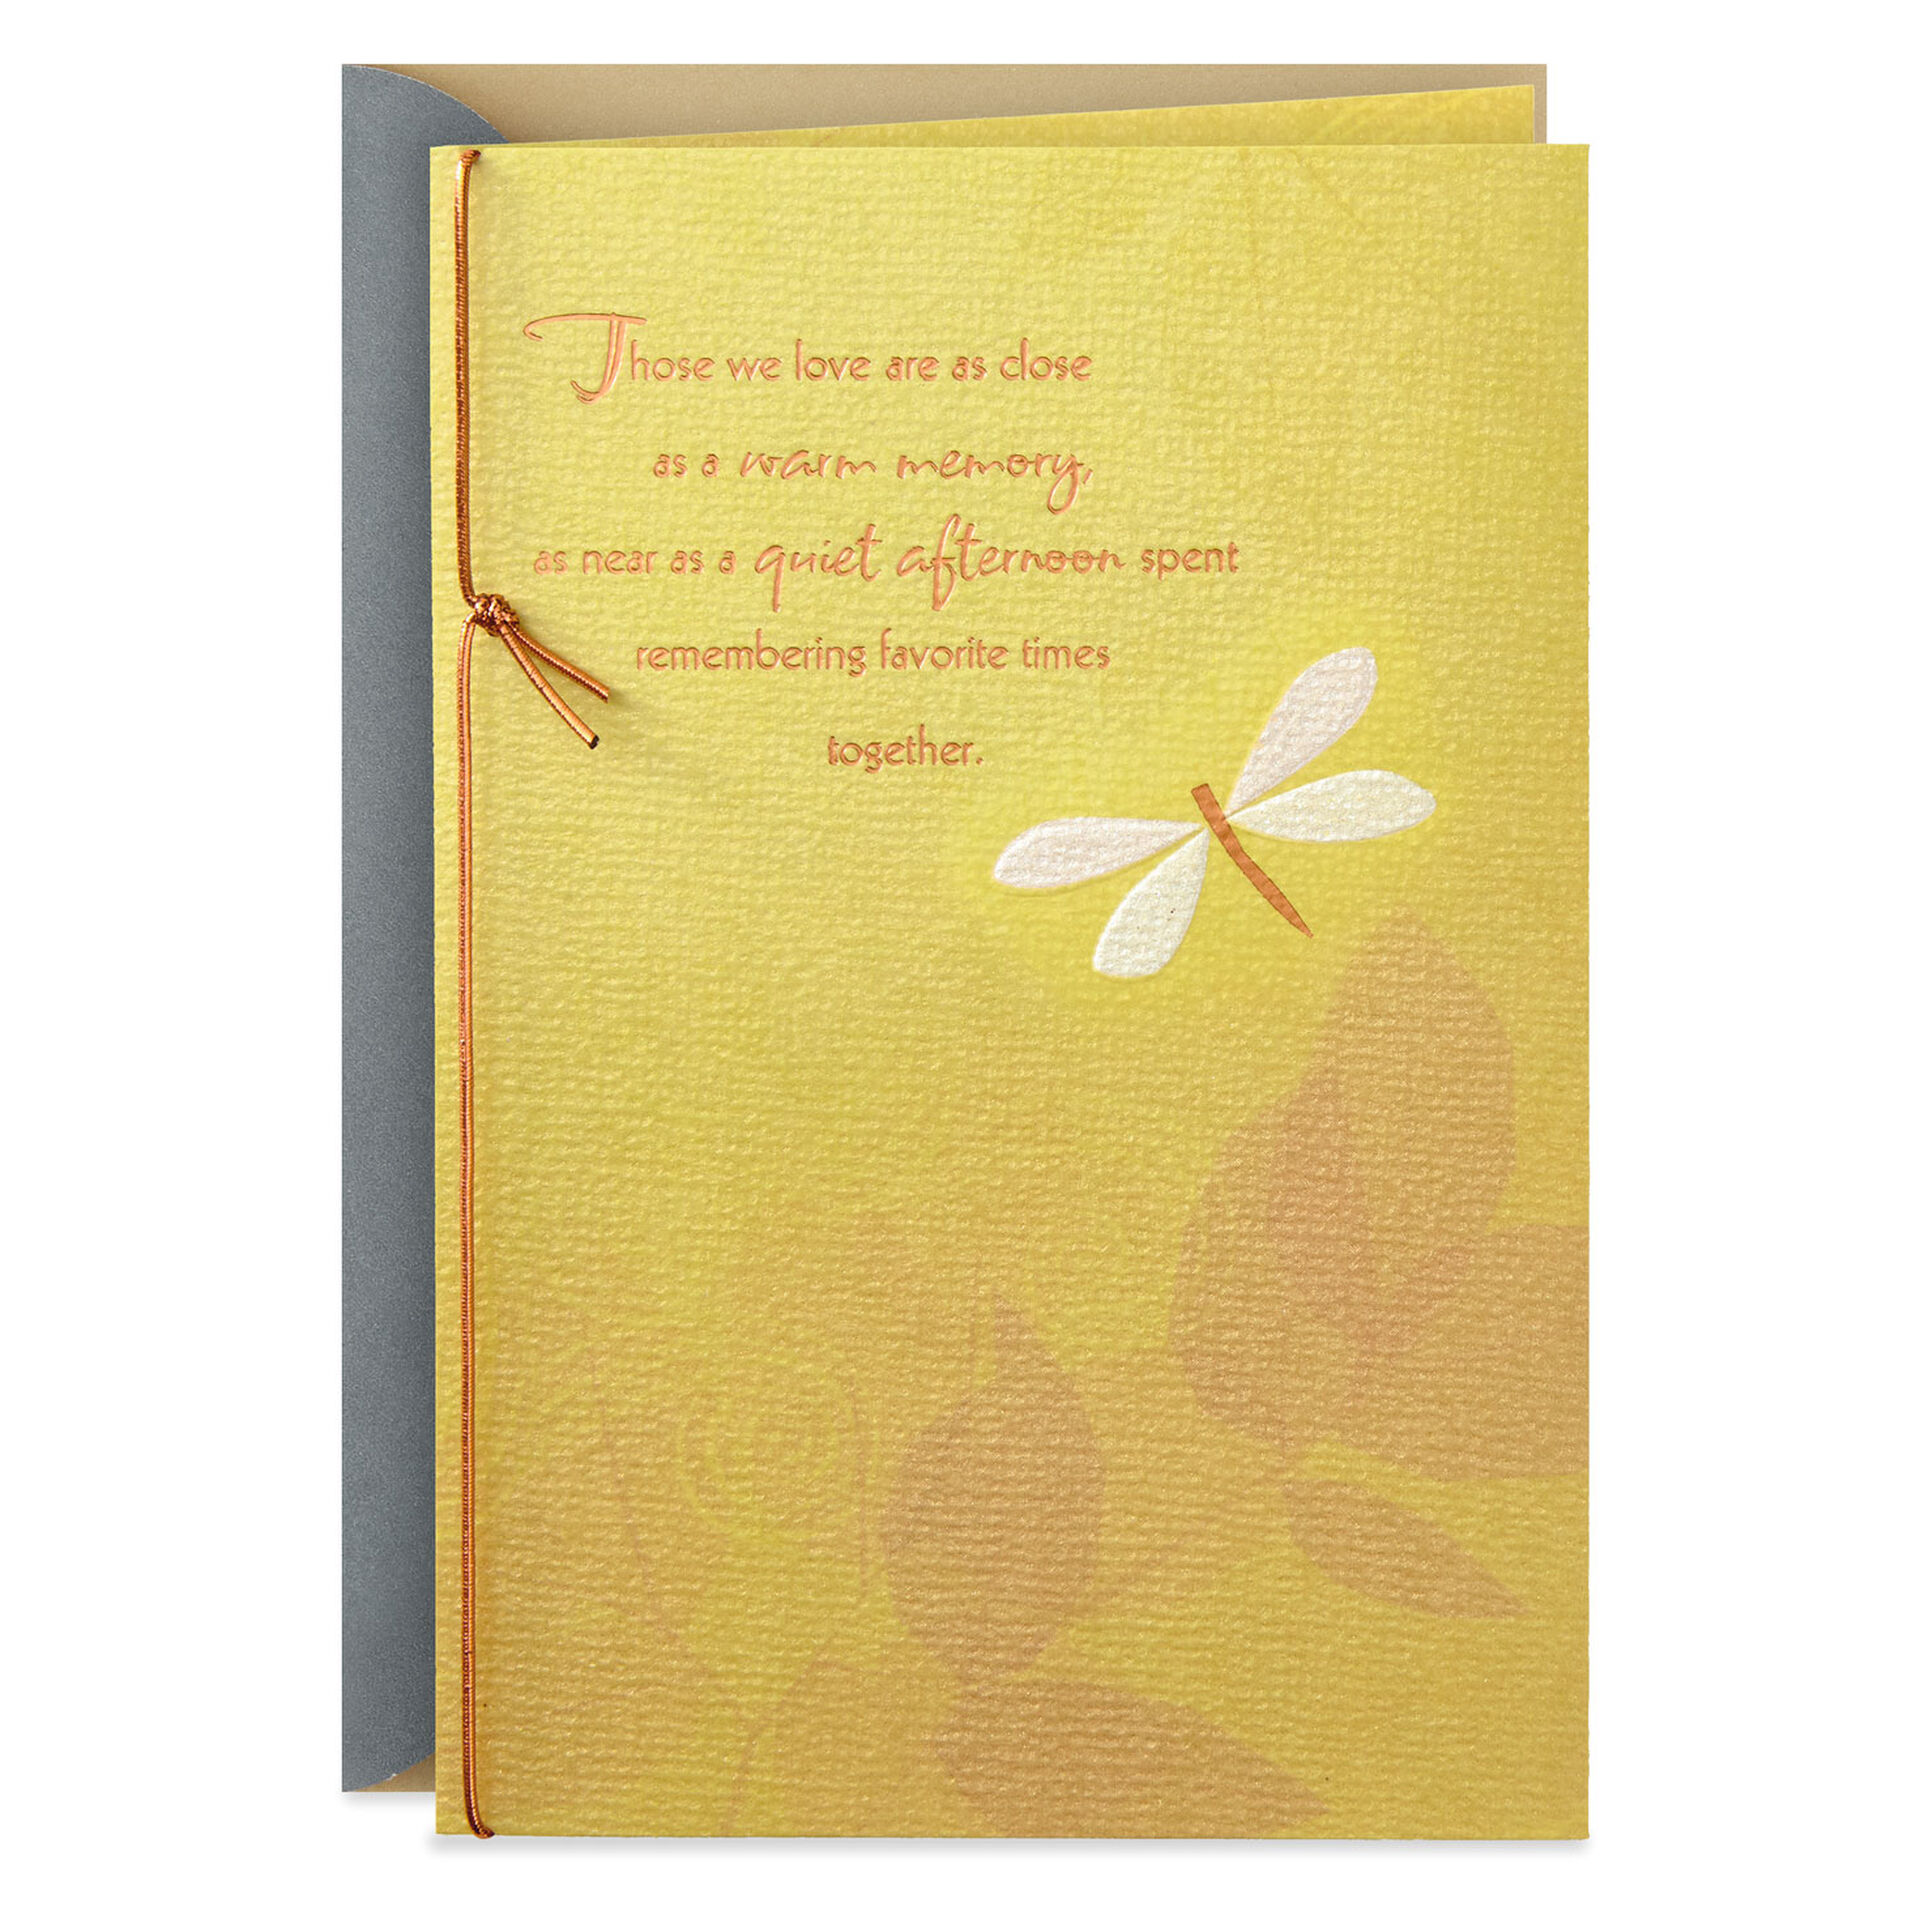 Memories-Love-and-Laughter-Sympathy-Card_499S2179_01